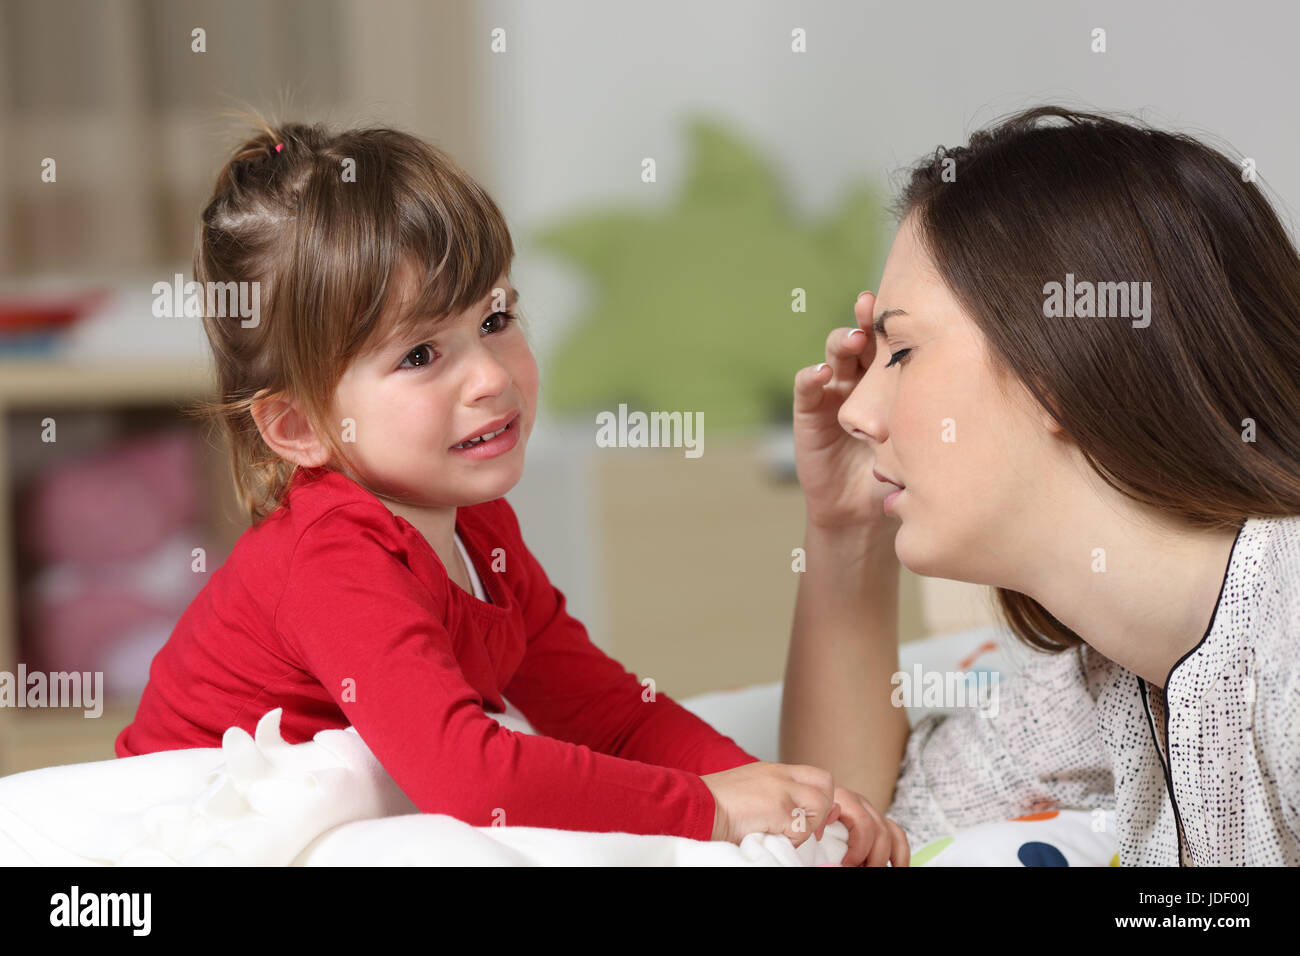 Fed up woman listening to her two years old daughter crying sitting on the bed in a house interior Stock Photo